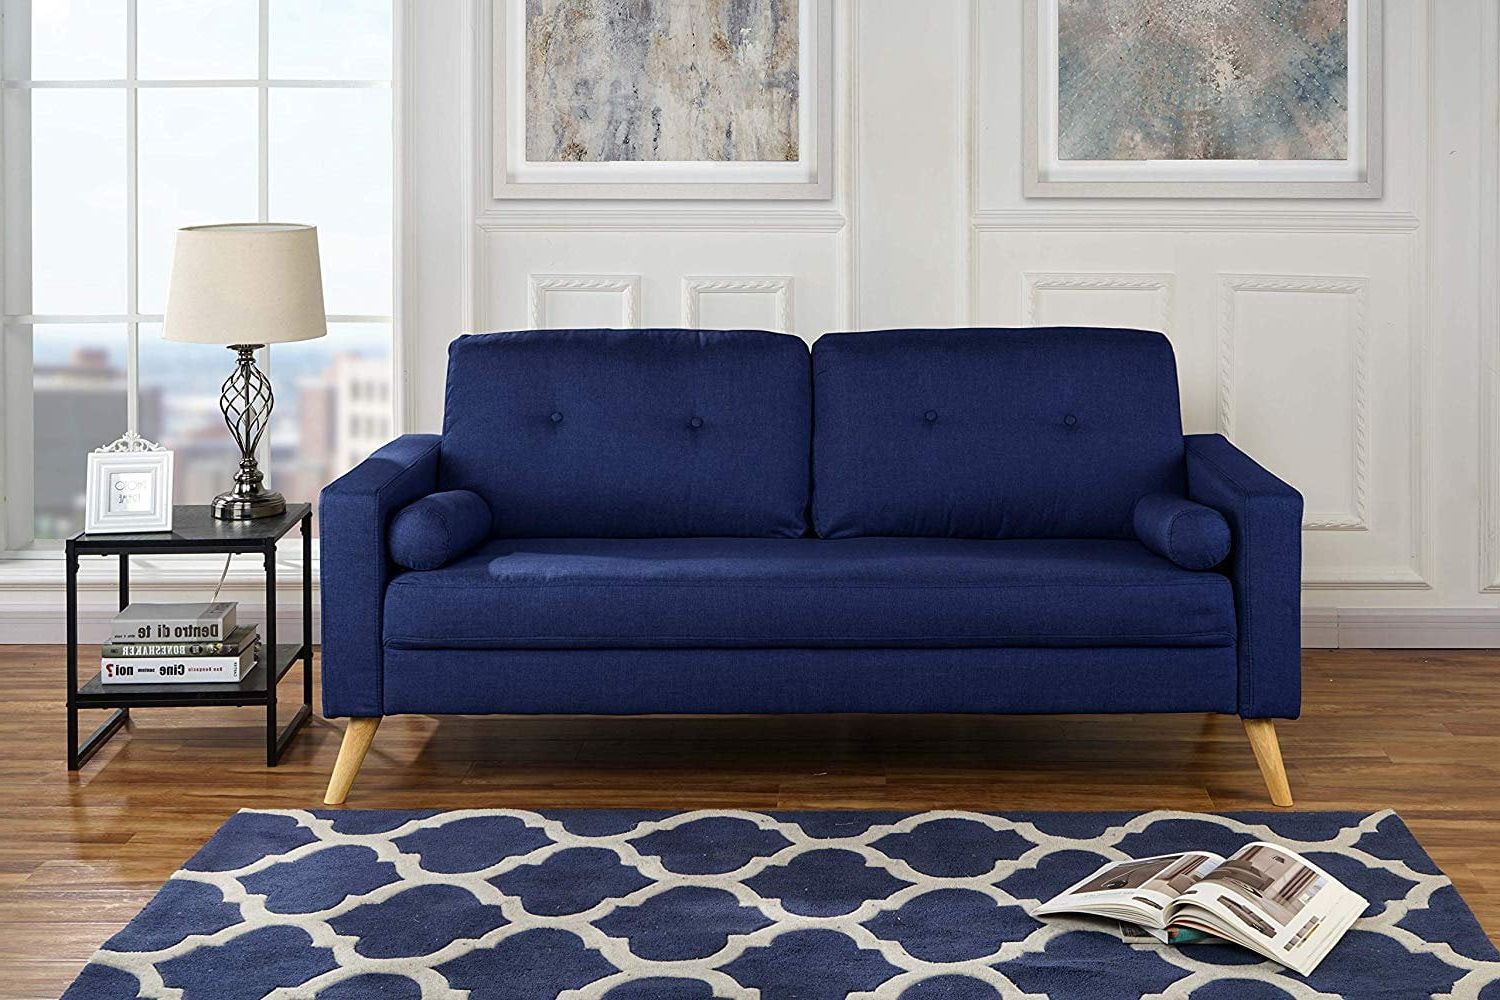 Modern Living Room Fabric Sofa, Couch With Tufted Buttons (dark Blue Regarding Sofas In Blue (Gallery 6 of 20)